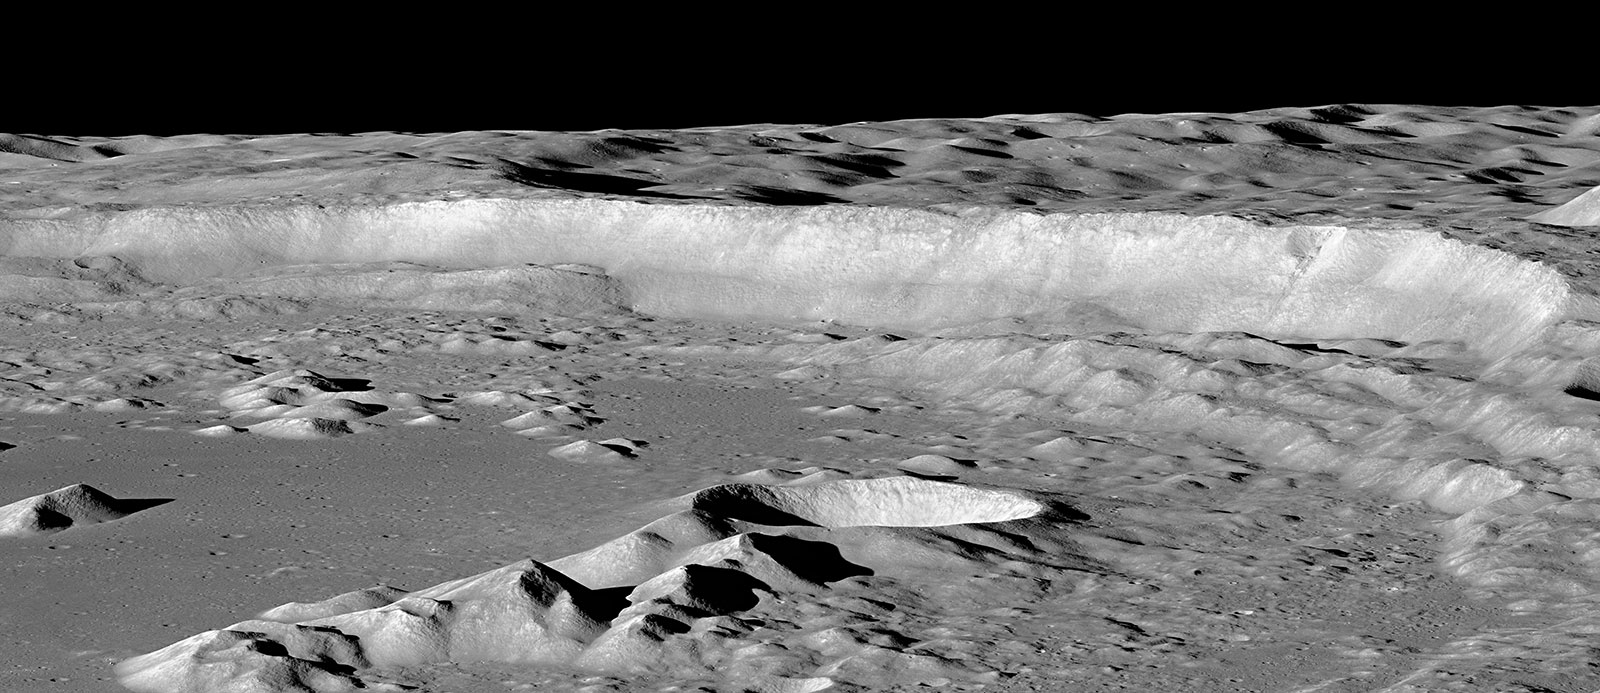 Antoniadi crater wall on the moon.